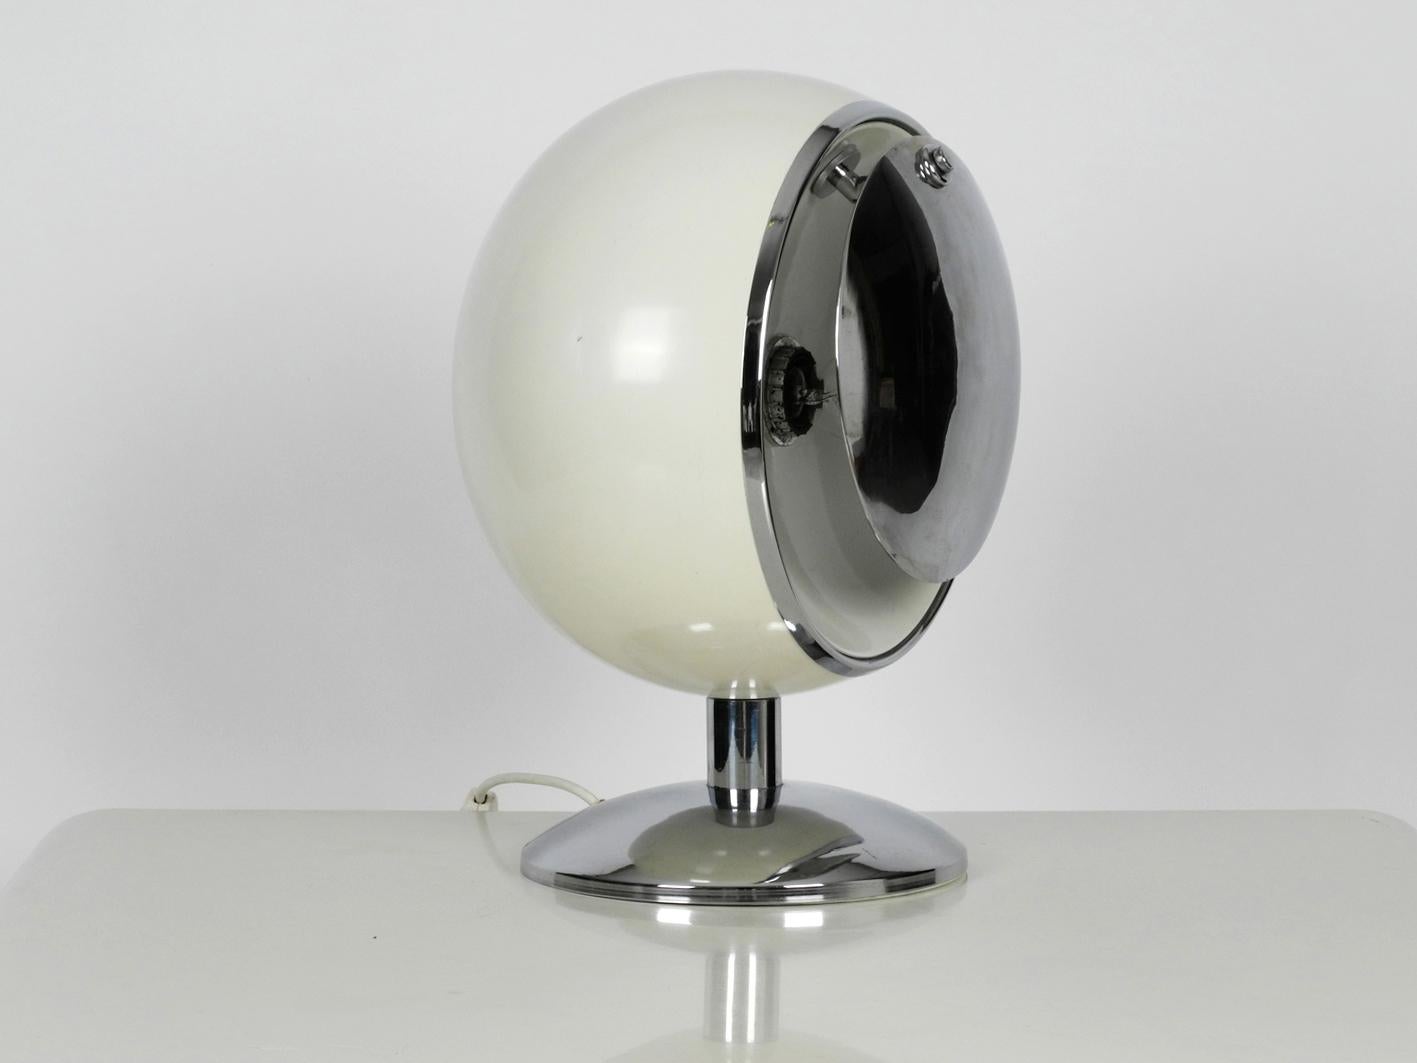 Very large and very rare heavy Italian metal table or floor lamp with movable cover. Rare Space Age Pop Art design. Made entirely of metal. Shade painted white, rim and cover chrome-plated. Very good vintage condition without damages. Just one tiny